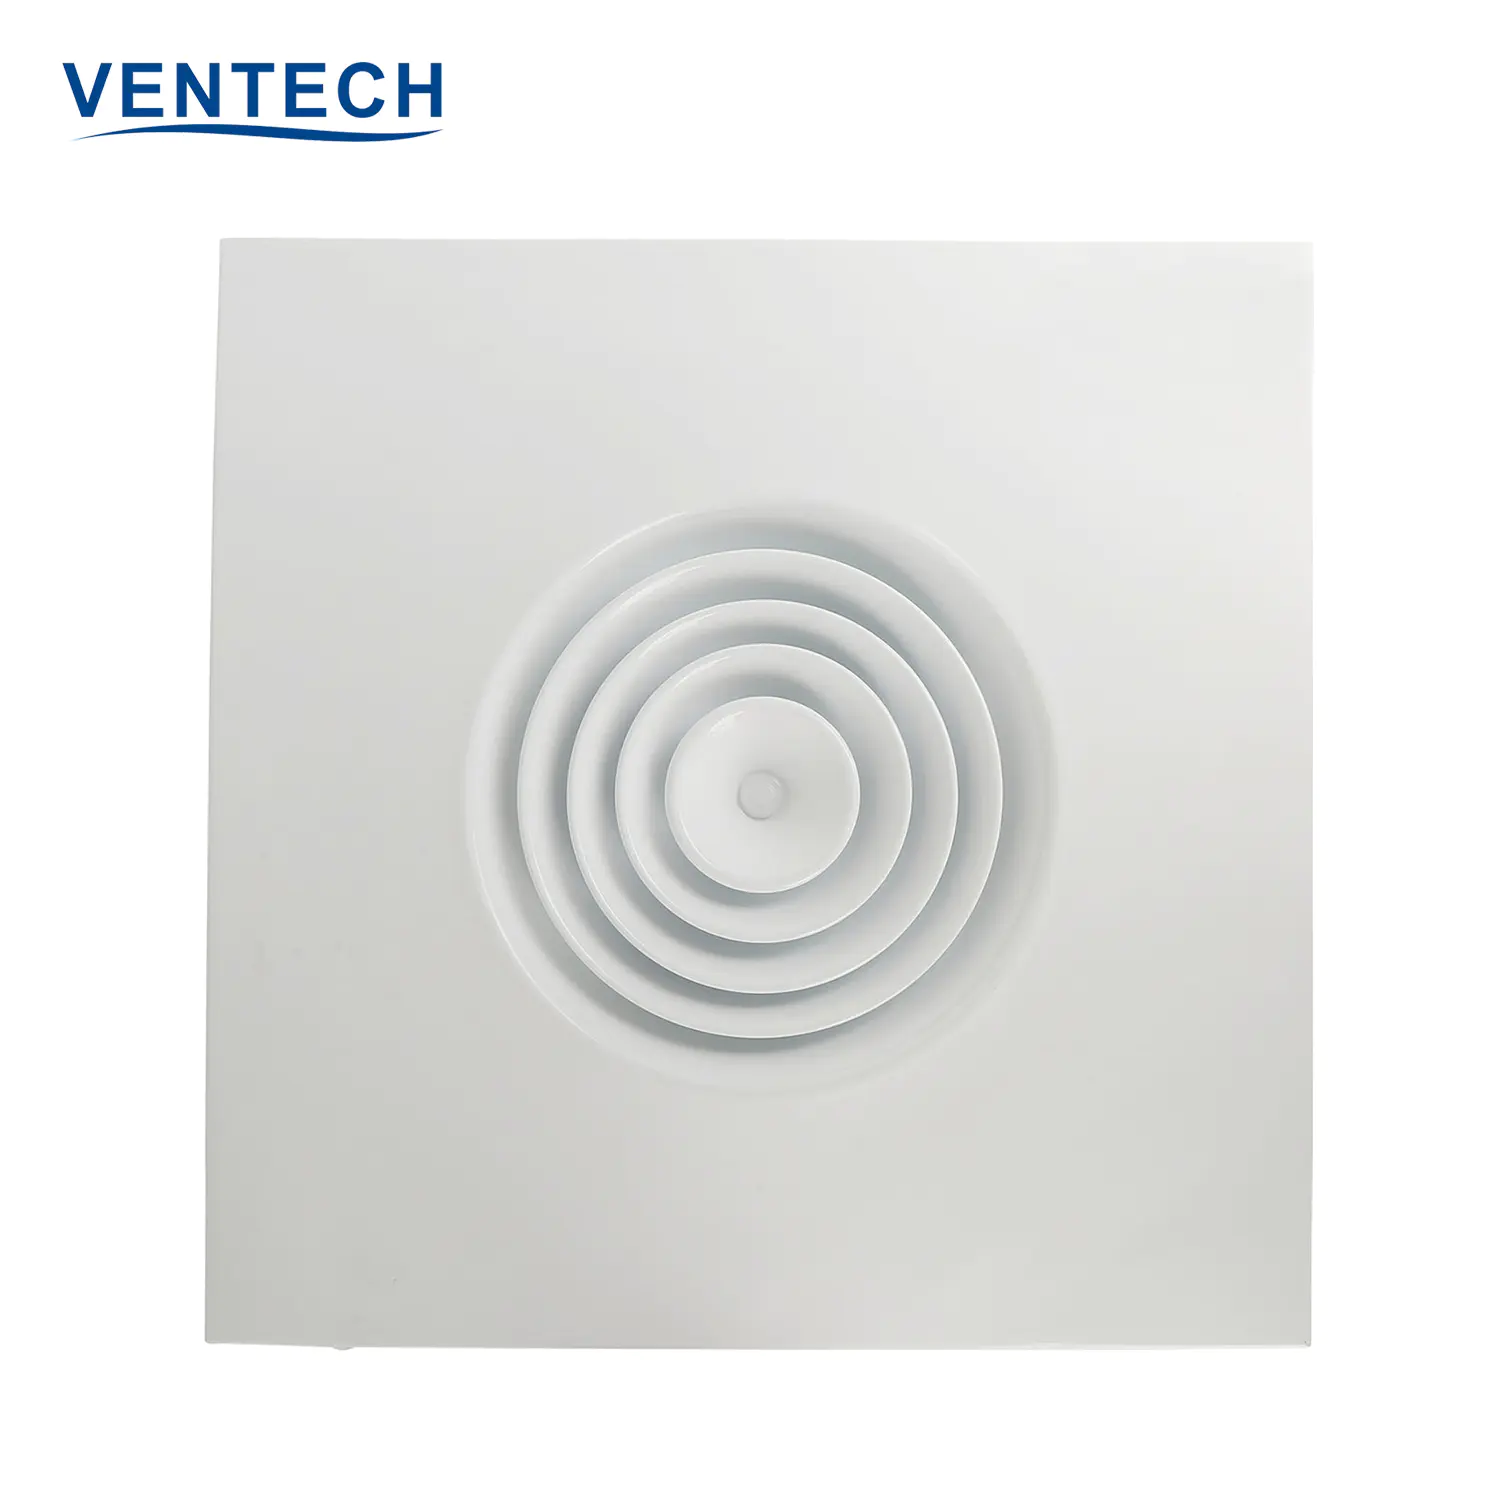 Ventech Air conditioning round air ventilation grilles ceiling diffuser with plastic damper